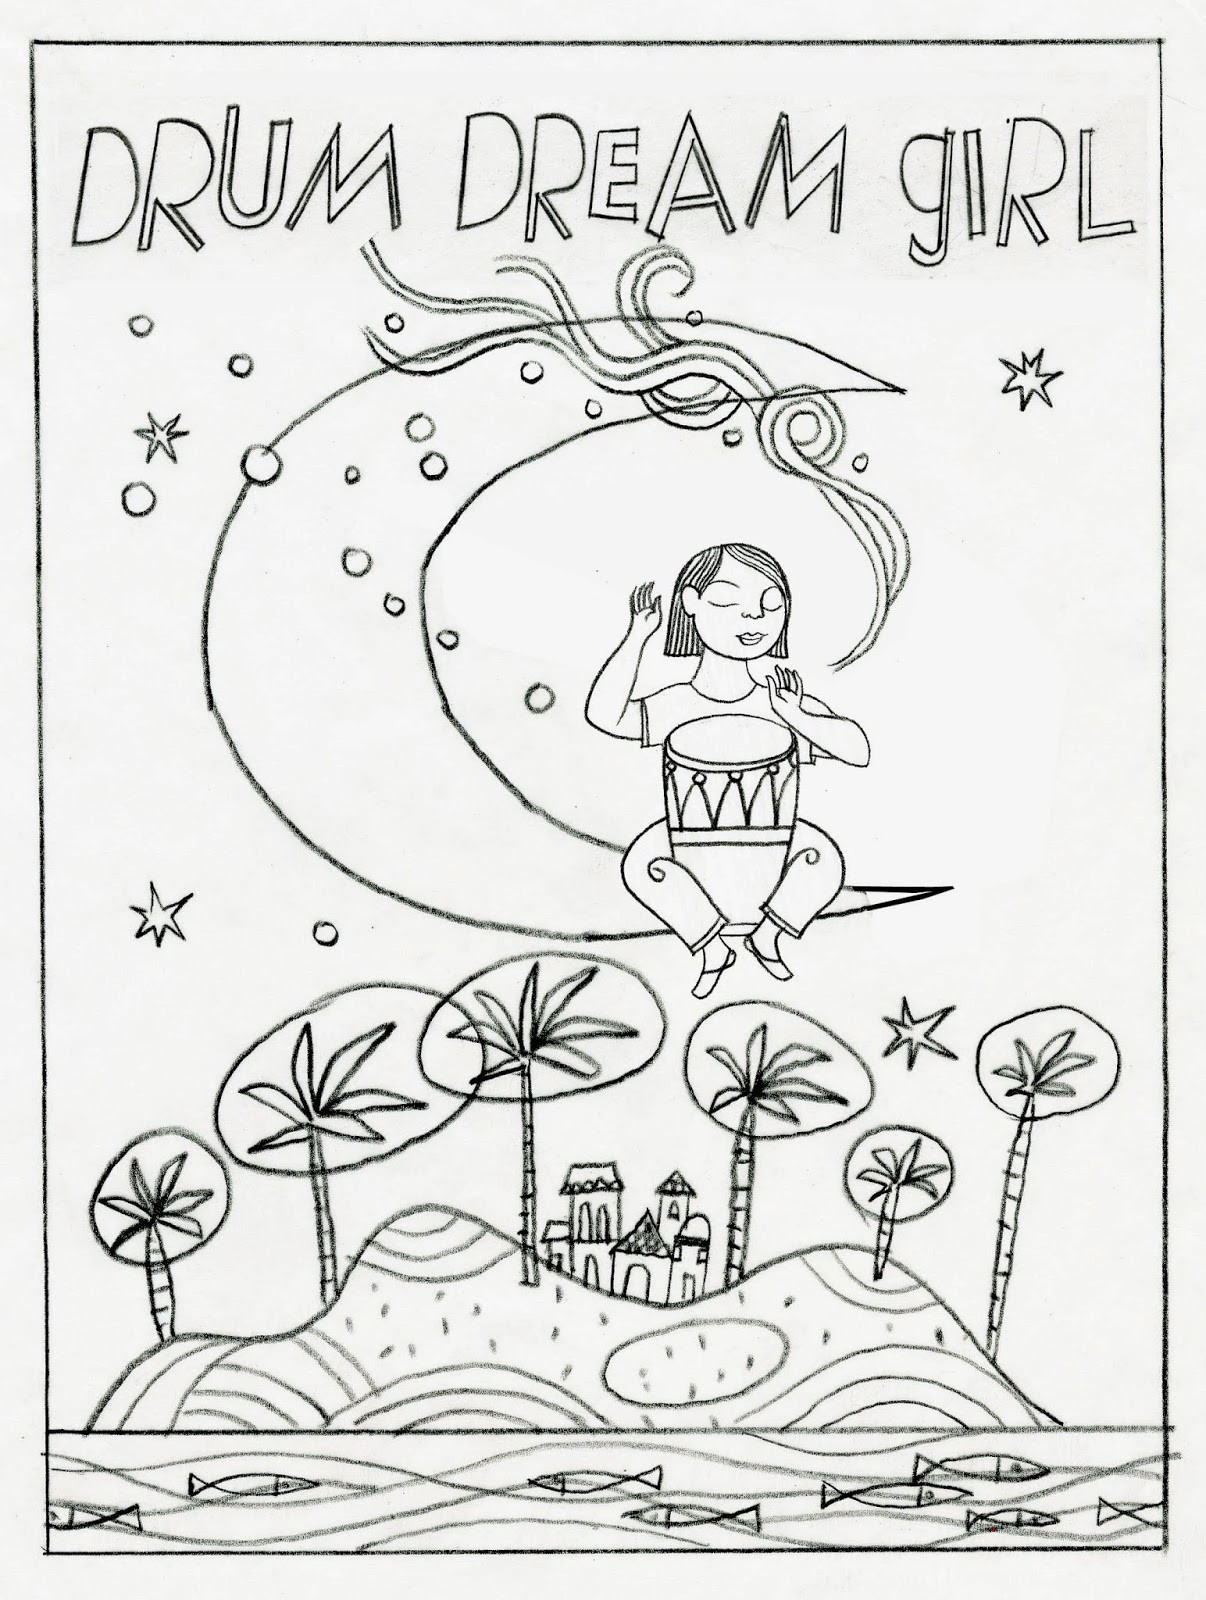 Dream Girl Coloring Book
 Rafael López Books Finding my rhythm with the Drum Dream Girl